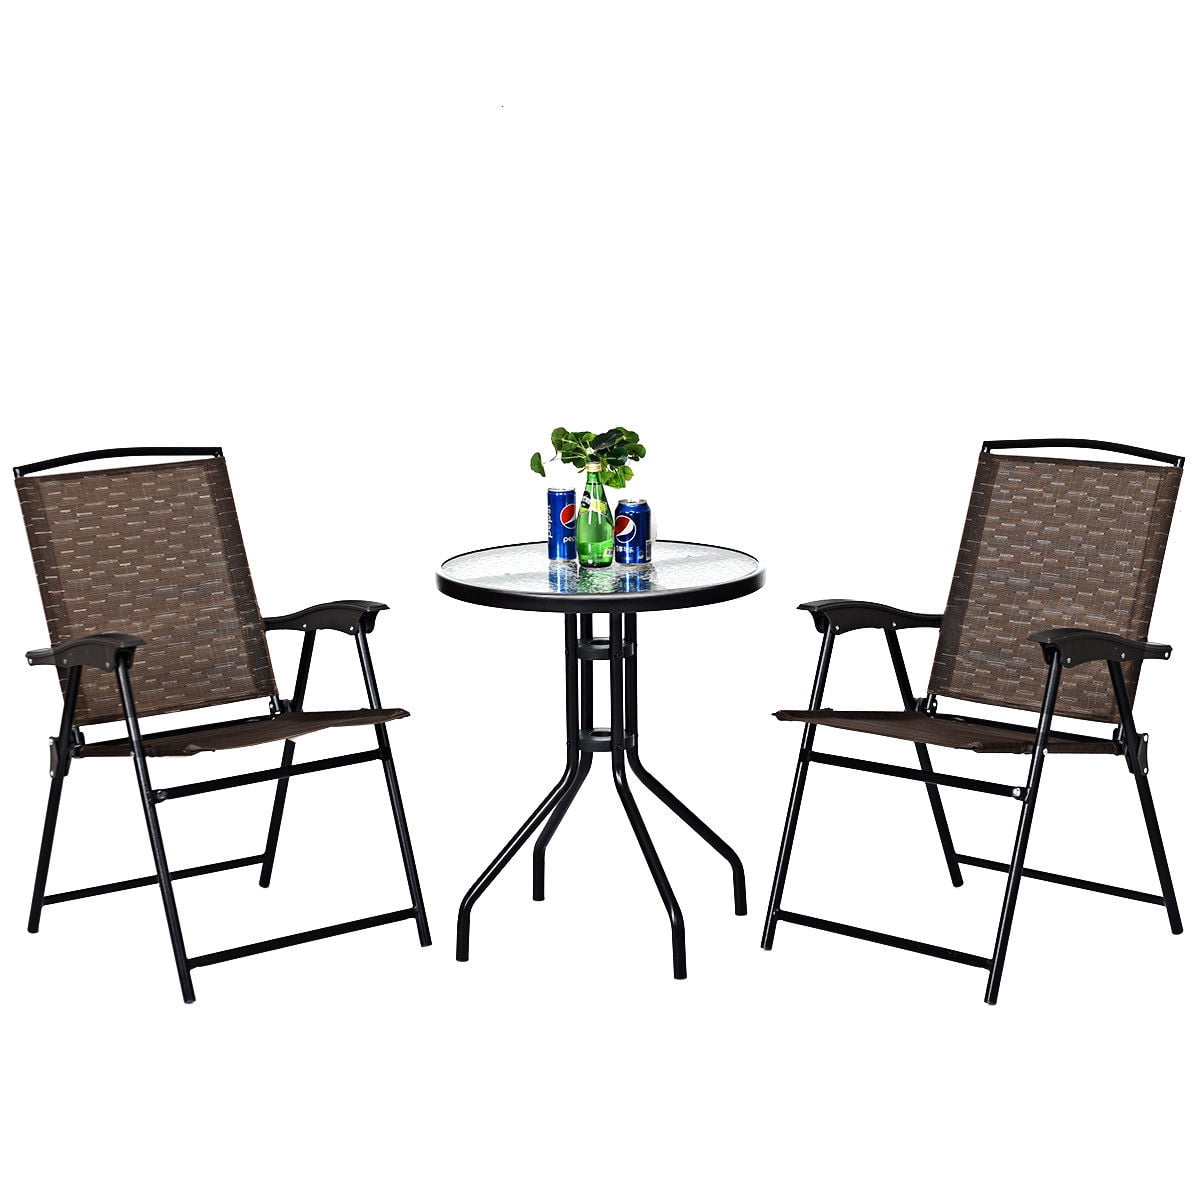 Folding Bistro Set Outdoor Garden Patio Dining Table Chairs Furniture Solid Wood 